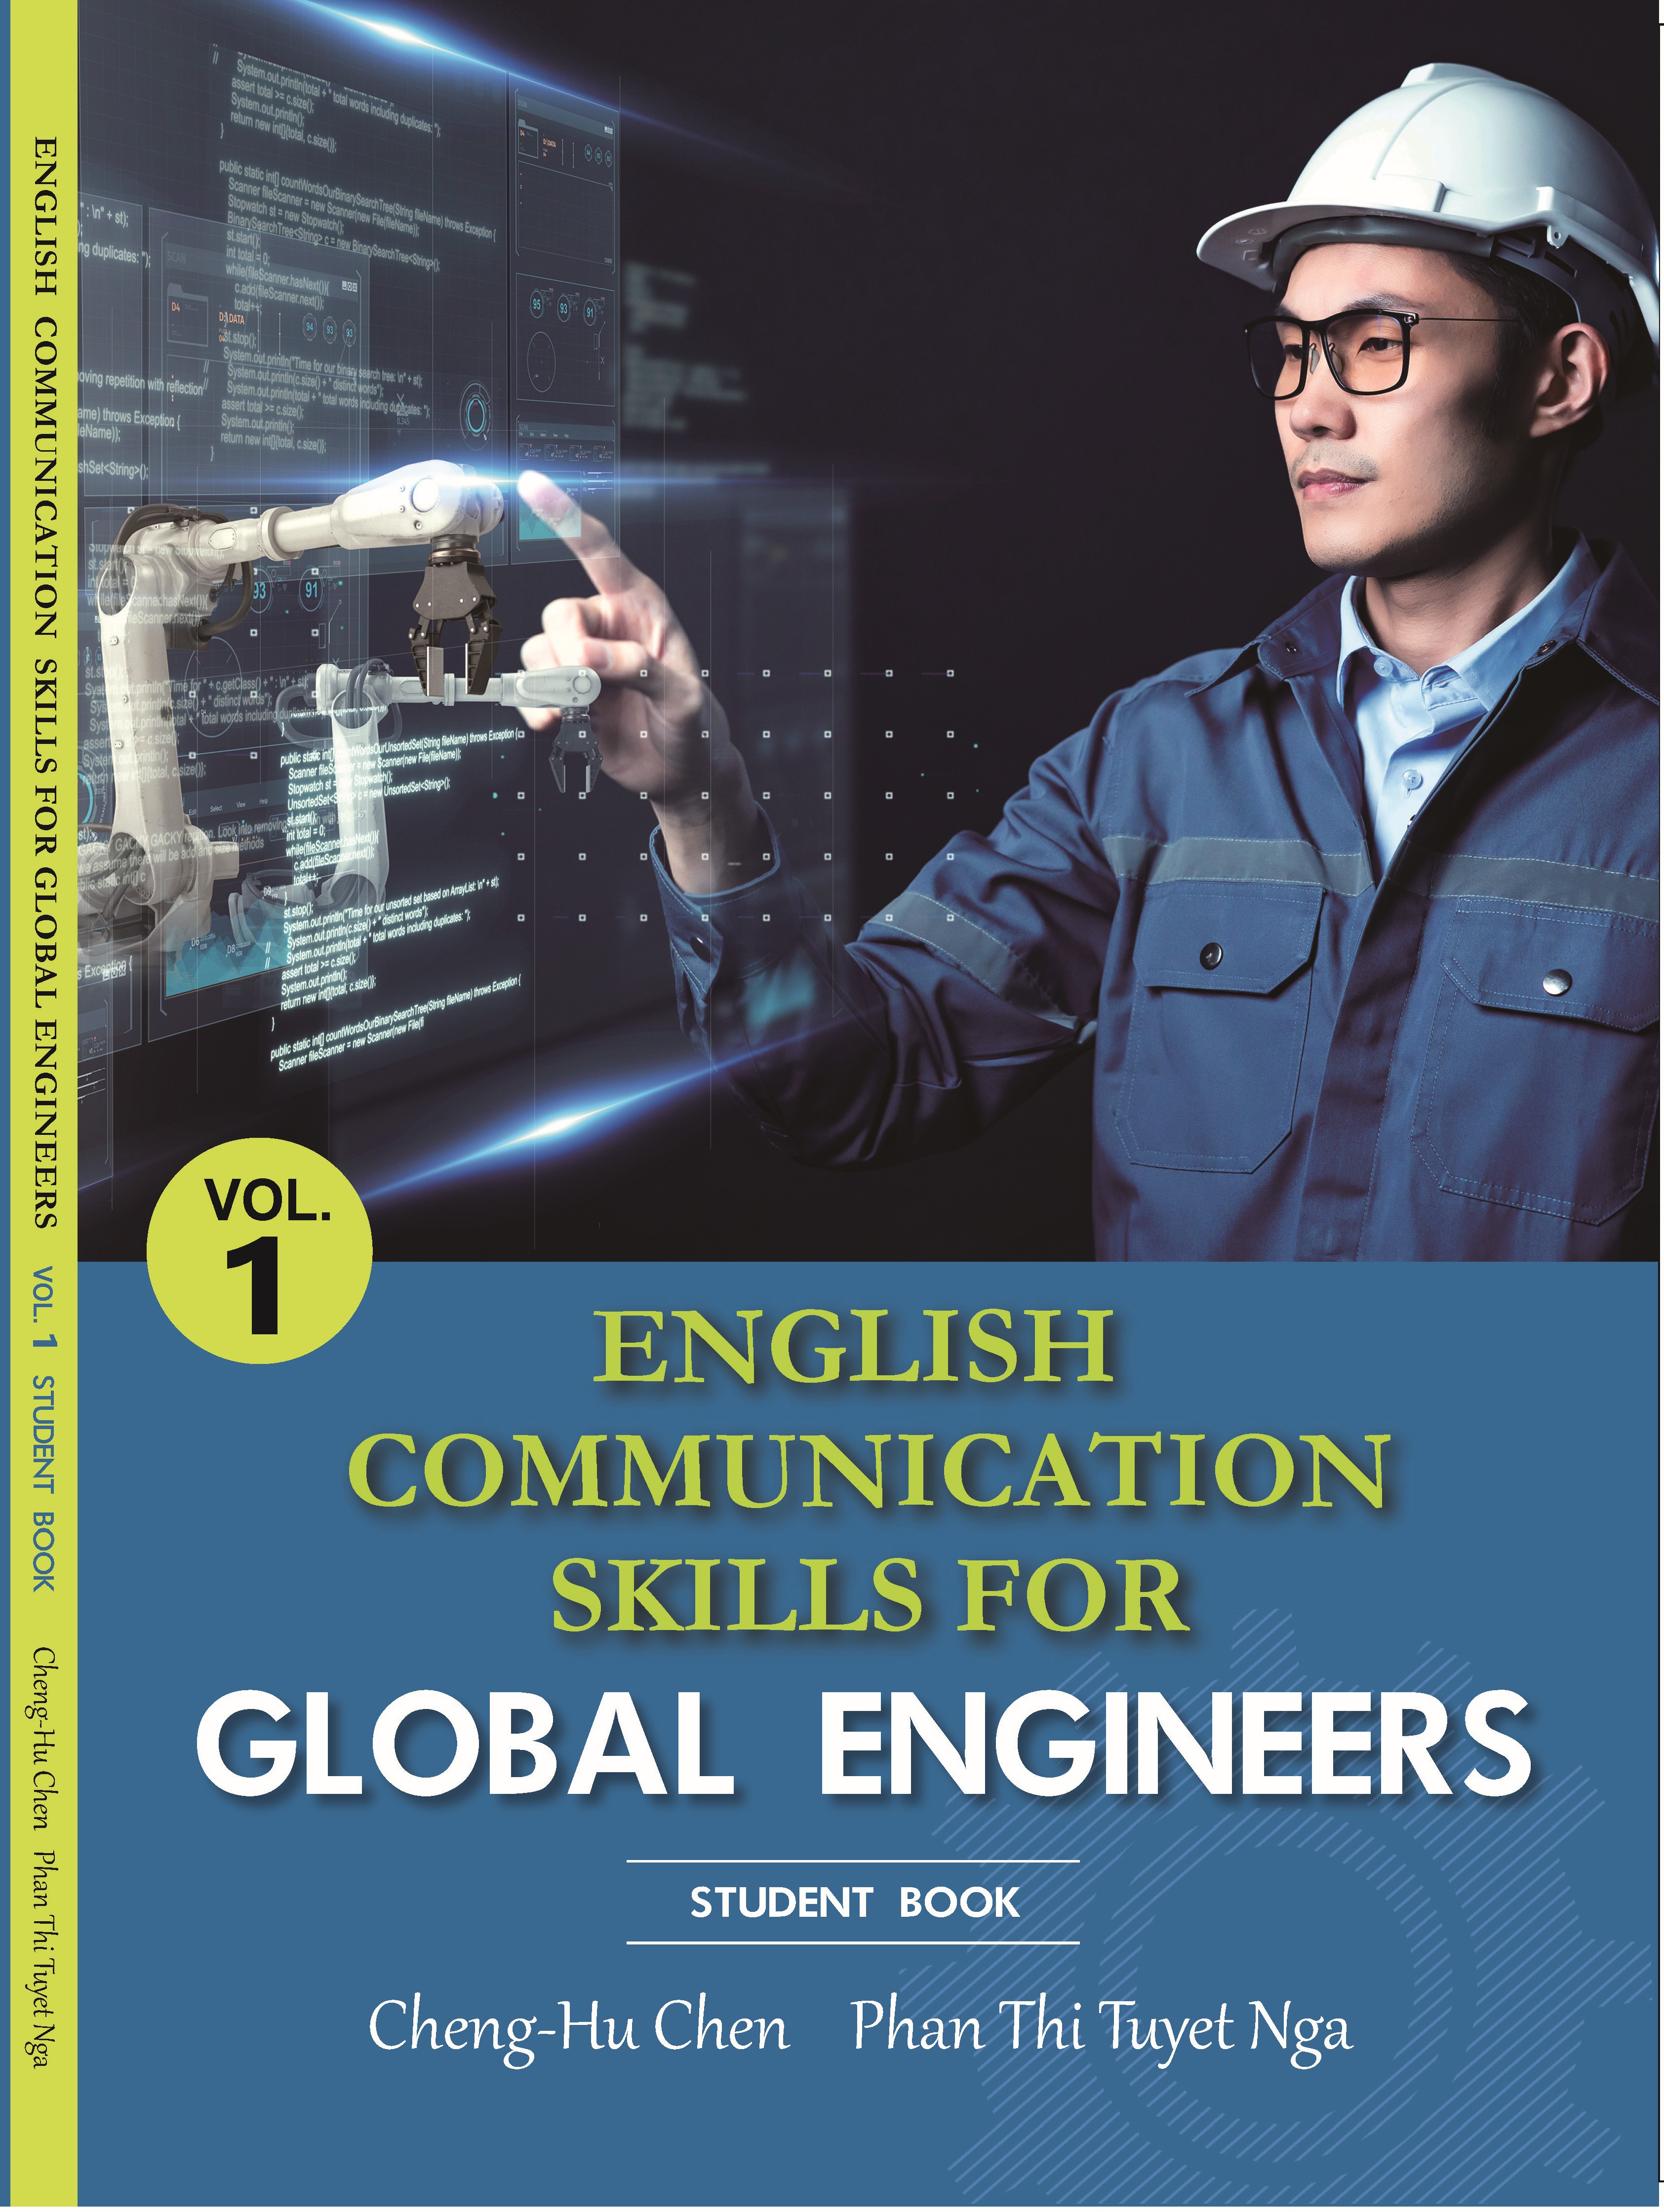 English communication skills for global engineers, Student book, Vol.1